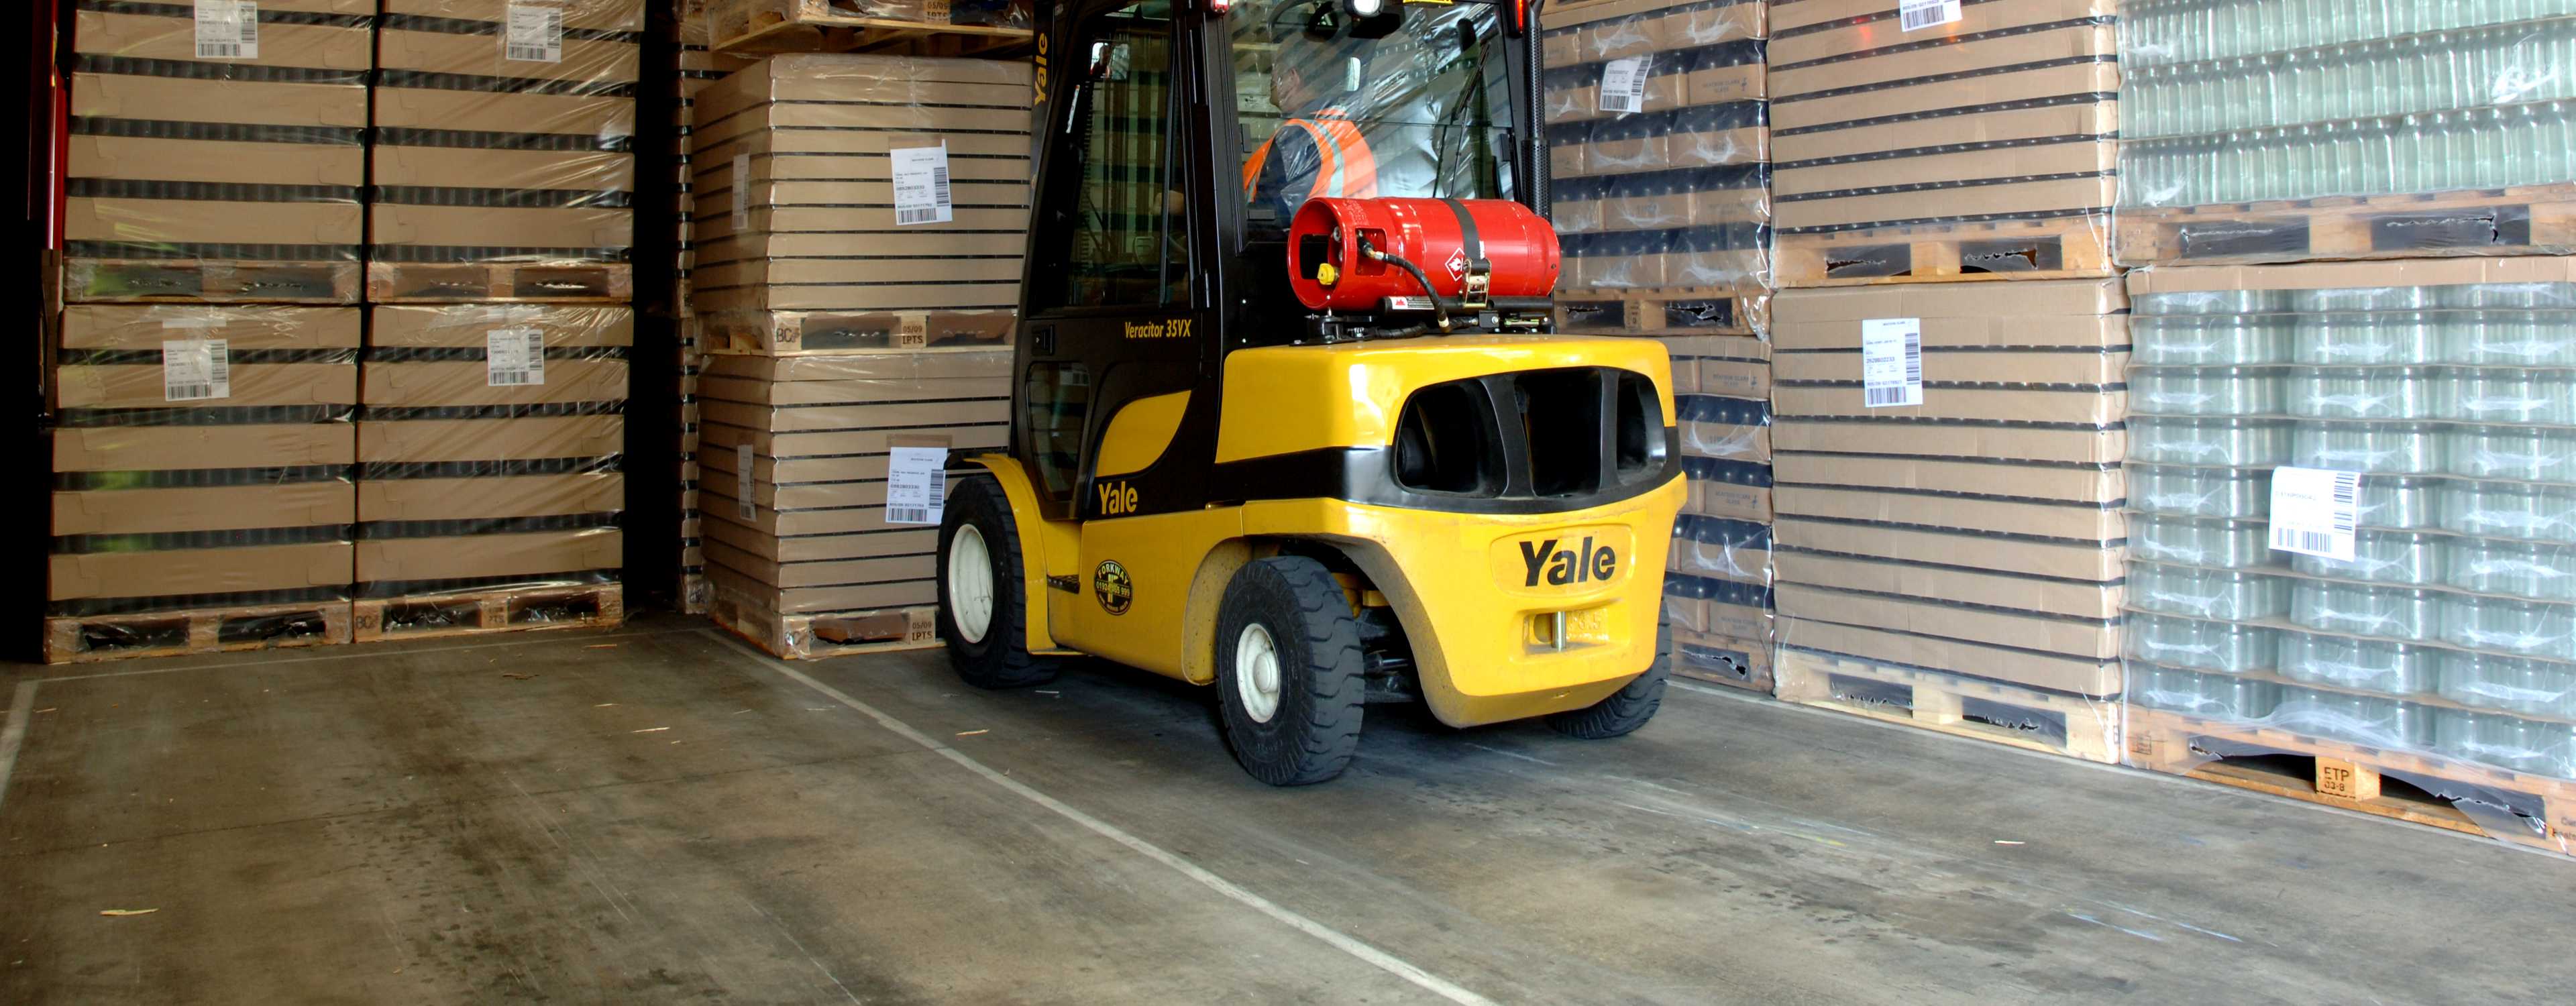 townsville forklifts